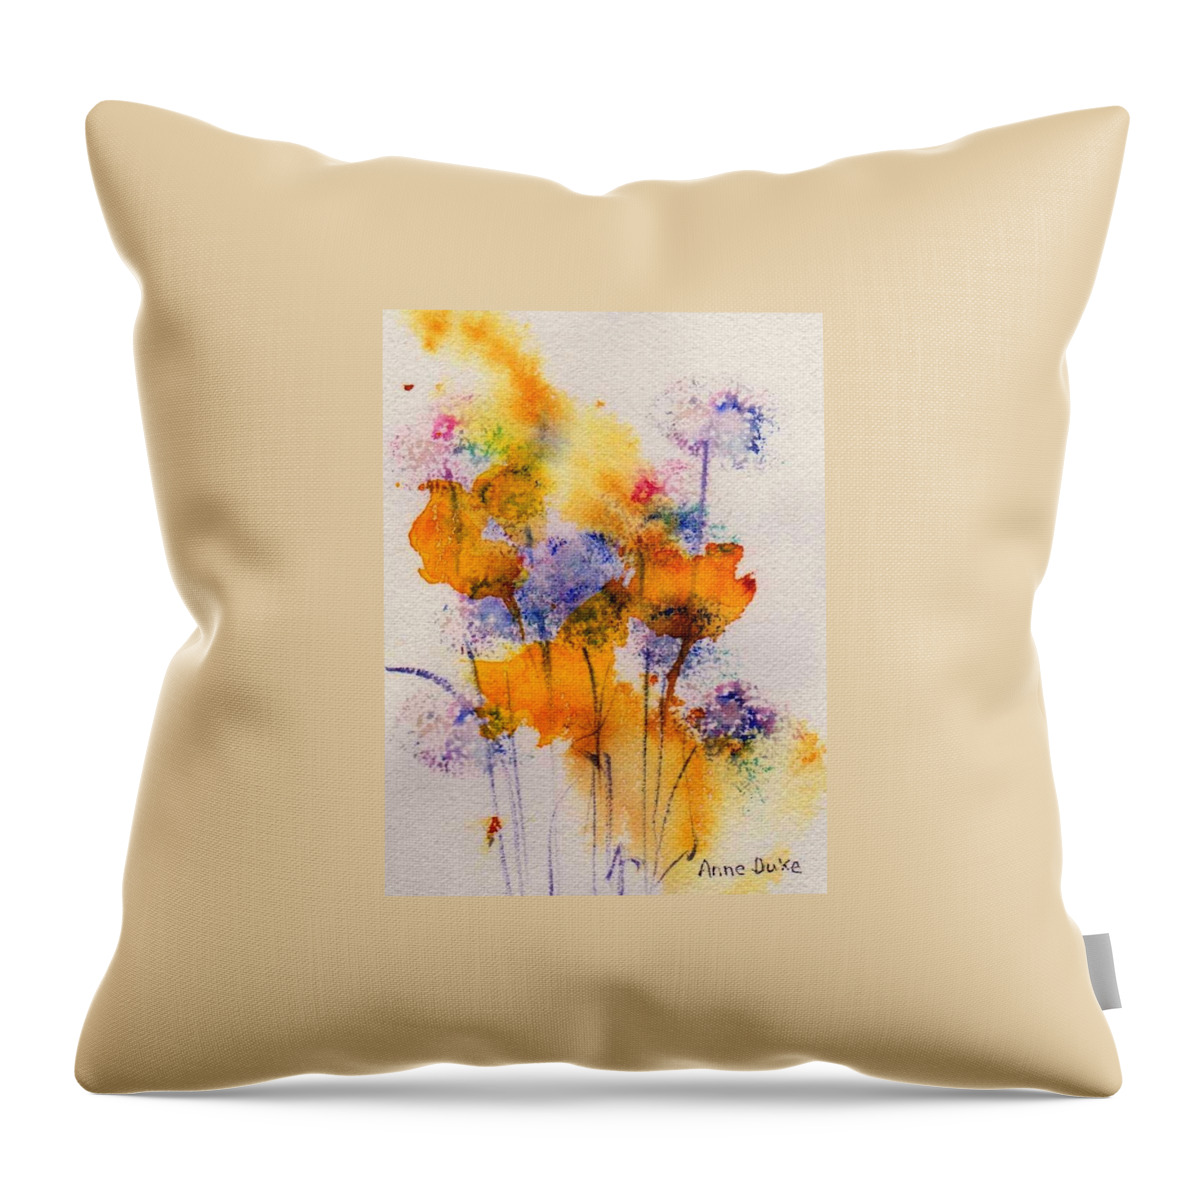 Floral Watercolor Throw Pillow featuring the painting Field Flowers by Anne Duke